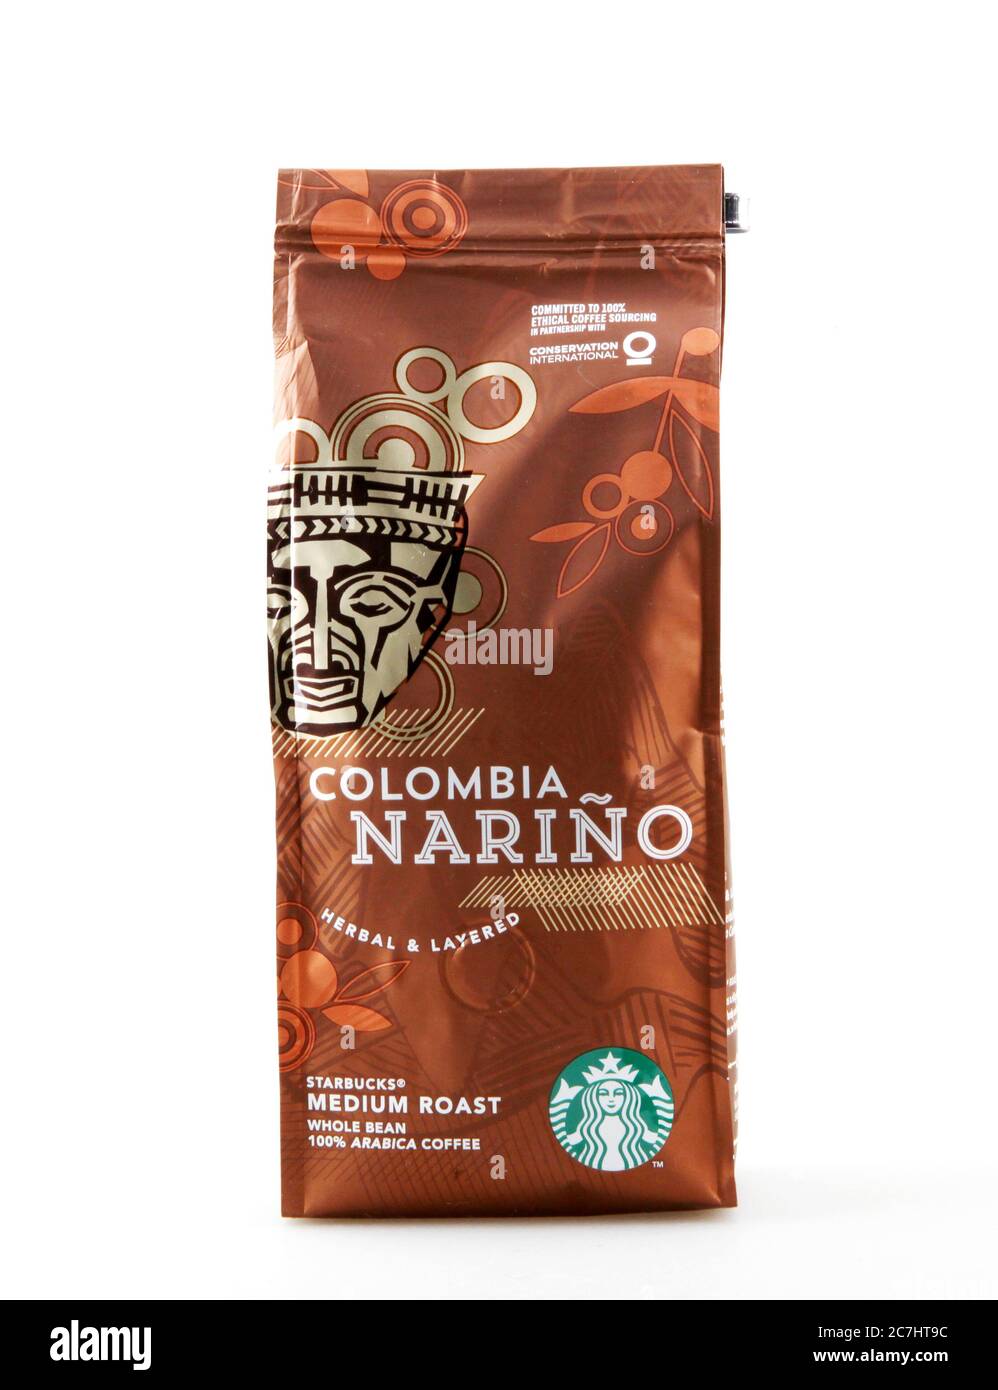 starbucks coffee beans come from